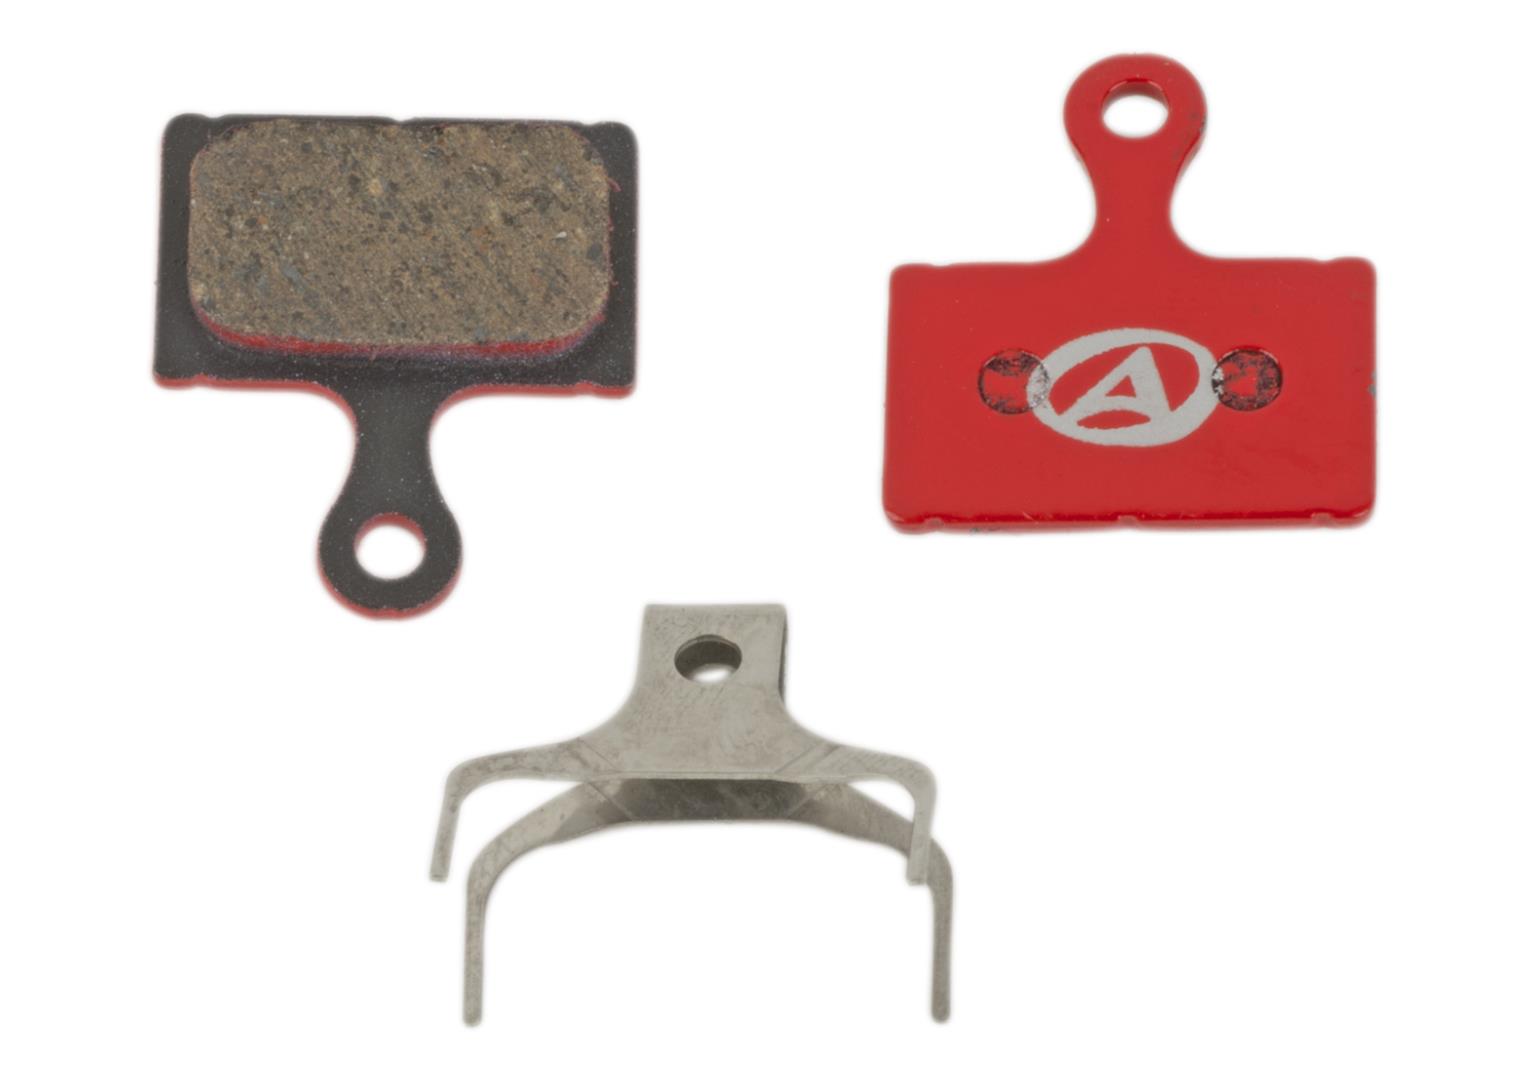 Author Brake pads ABS-27 Shi K03  (red)